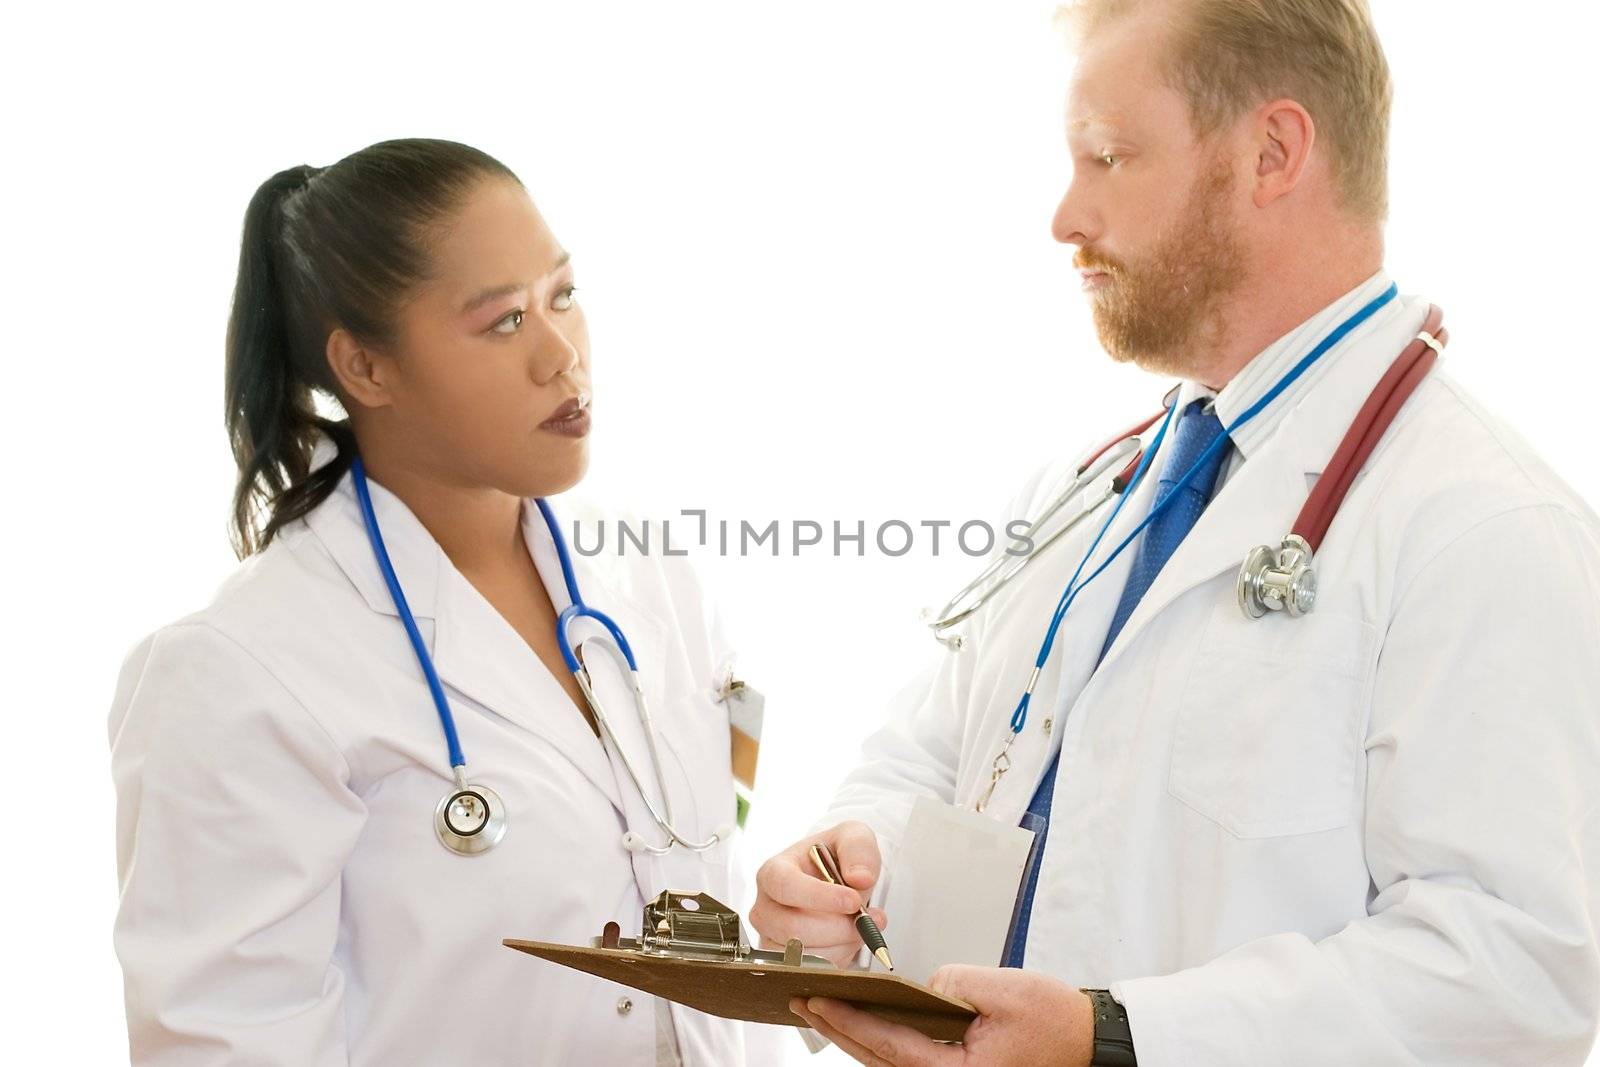 A male and female doctor in discussion.  Focus on man